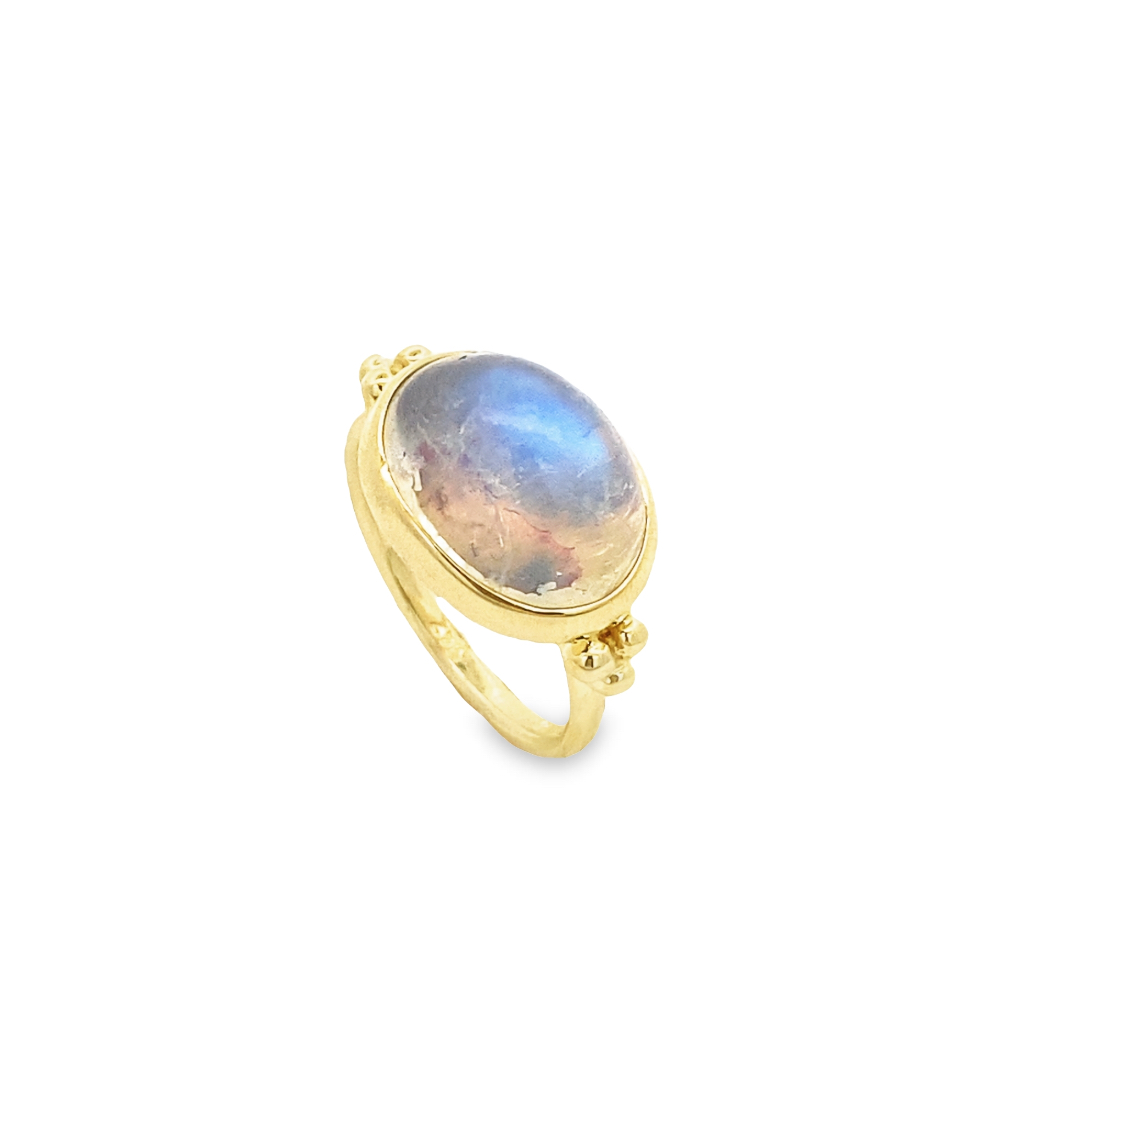 Mazza 14 Karat Yellow Gold Moonstone Ring From The Capri Collection